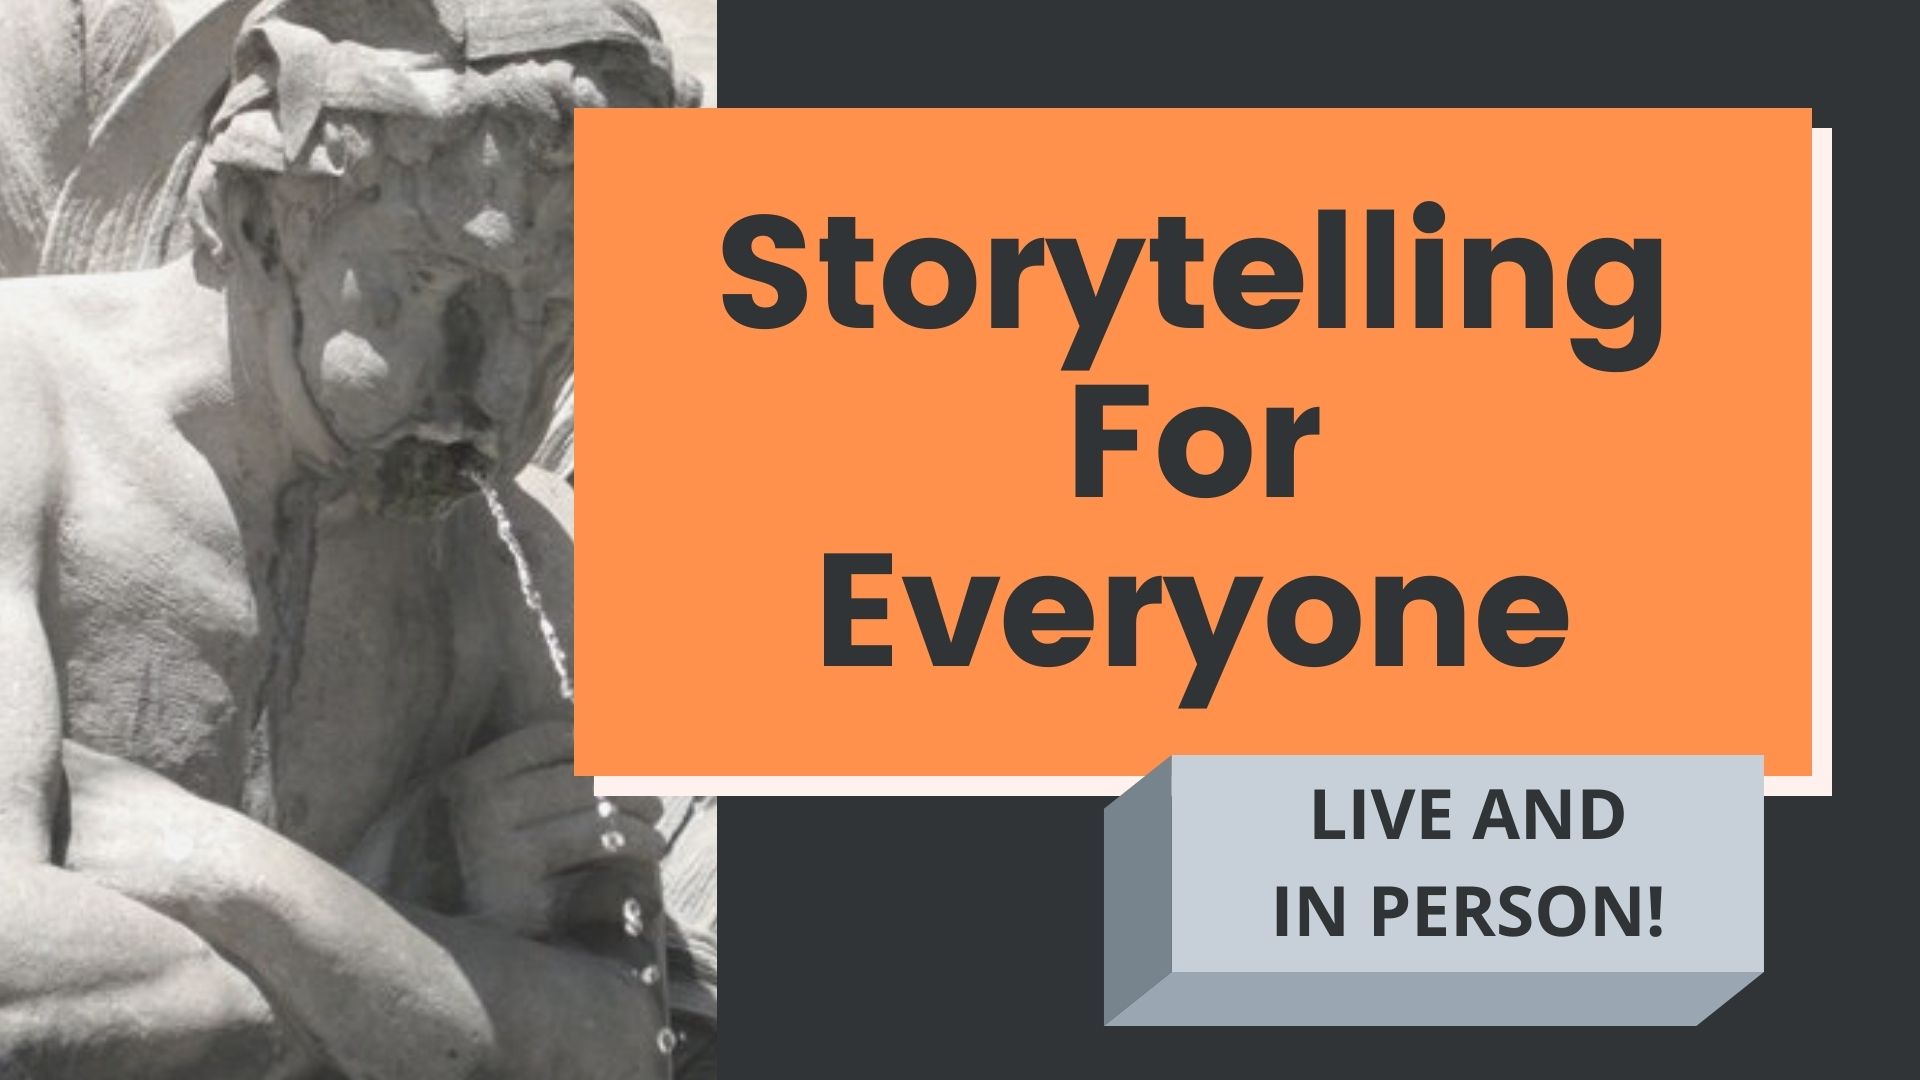 Storytelling For Everyone: Four Week Course in Personal Narrative (Mondays in May)